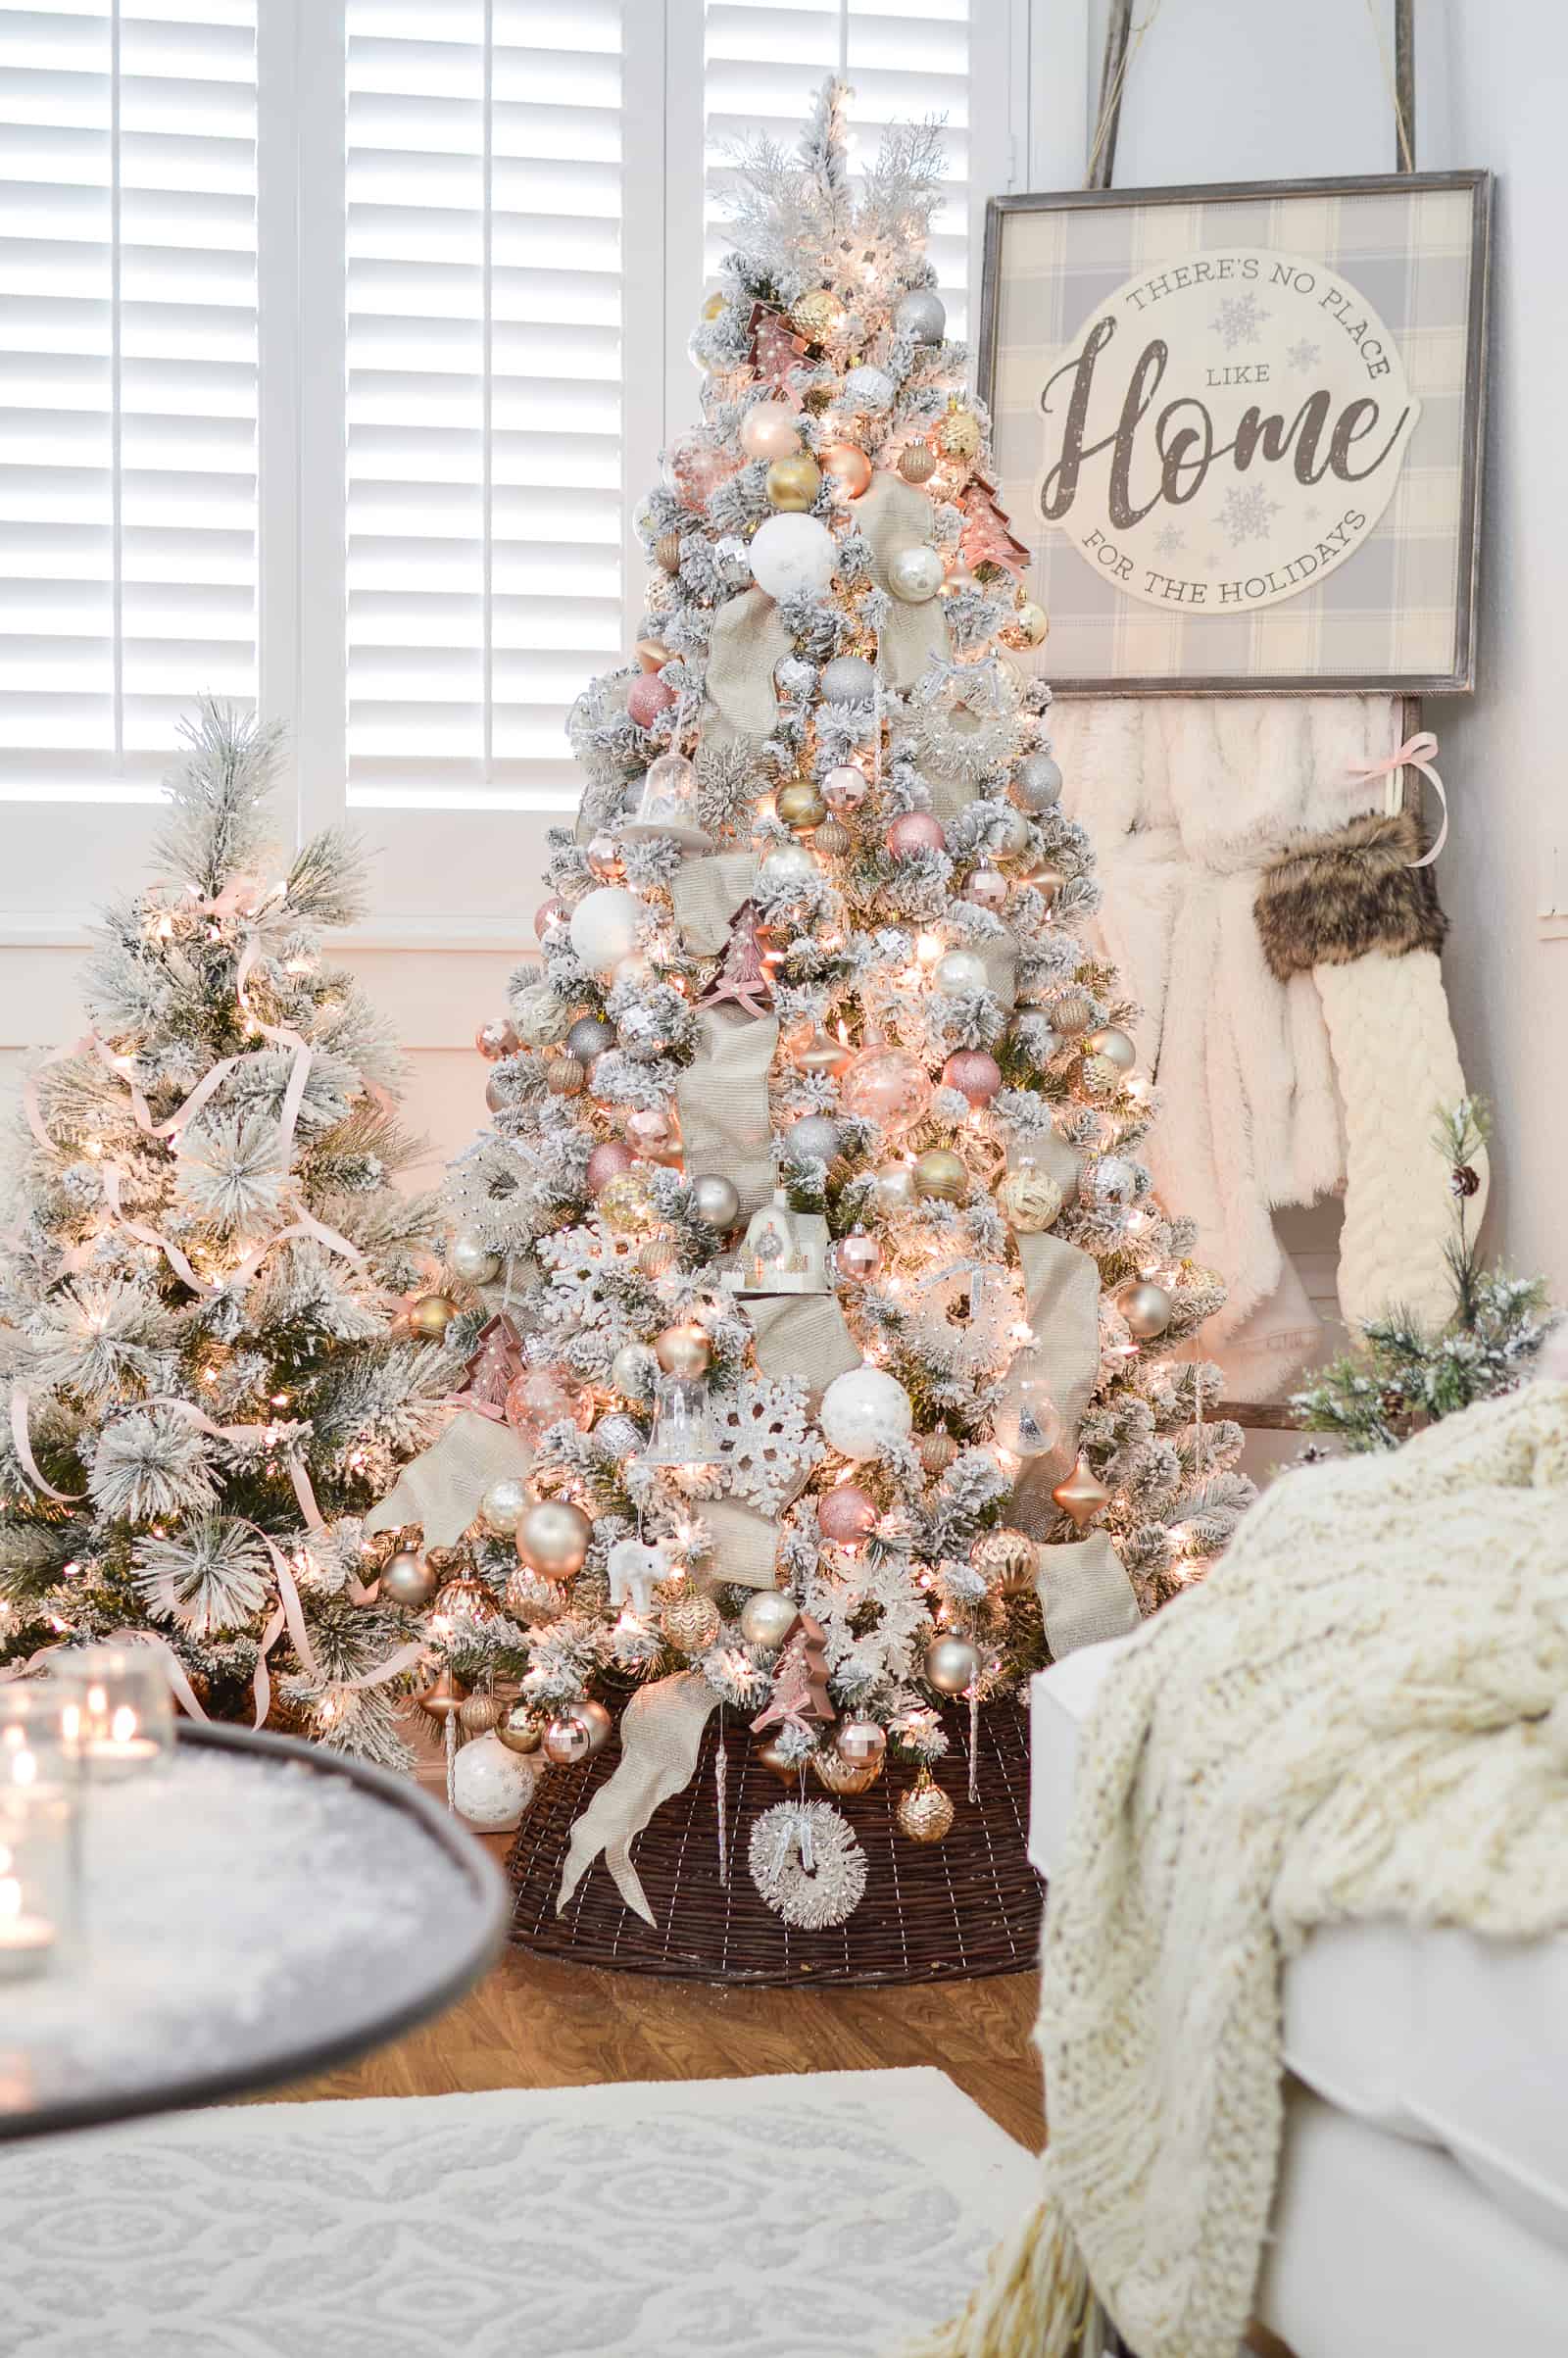 Outstanding silver Christmas tree ideas